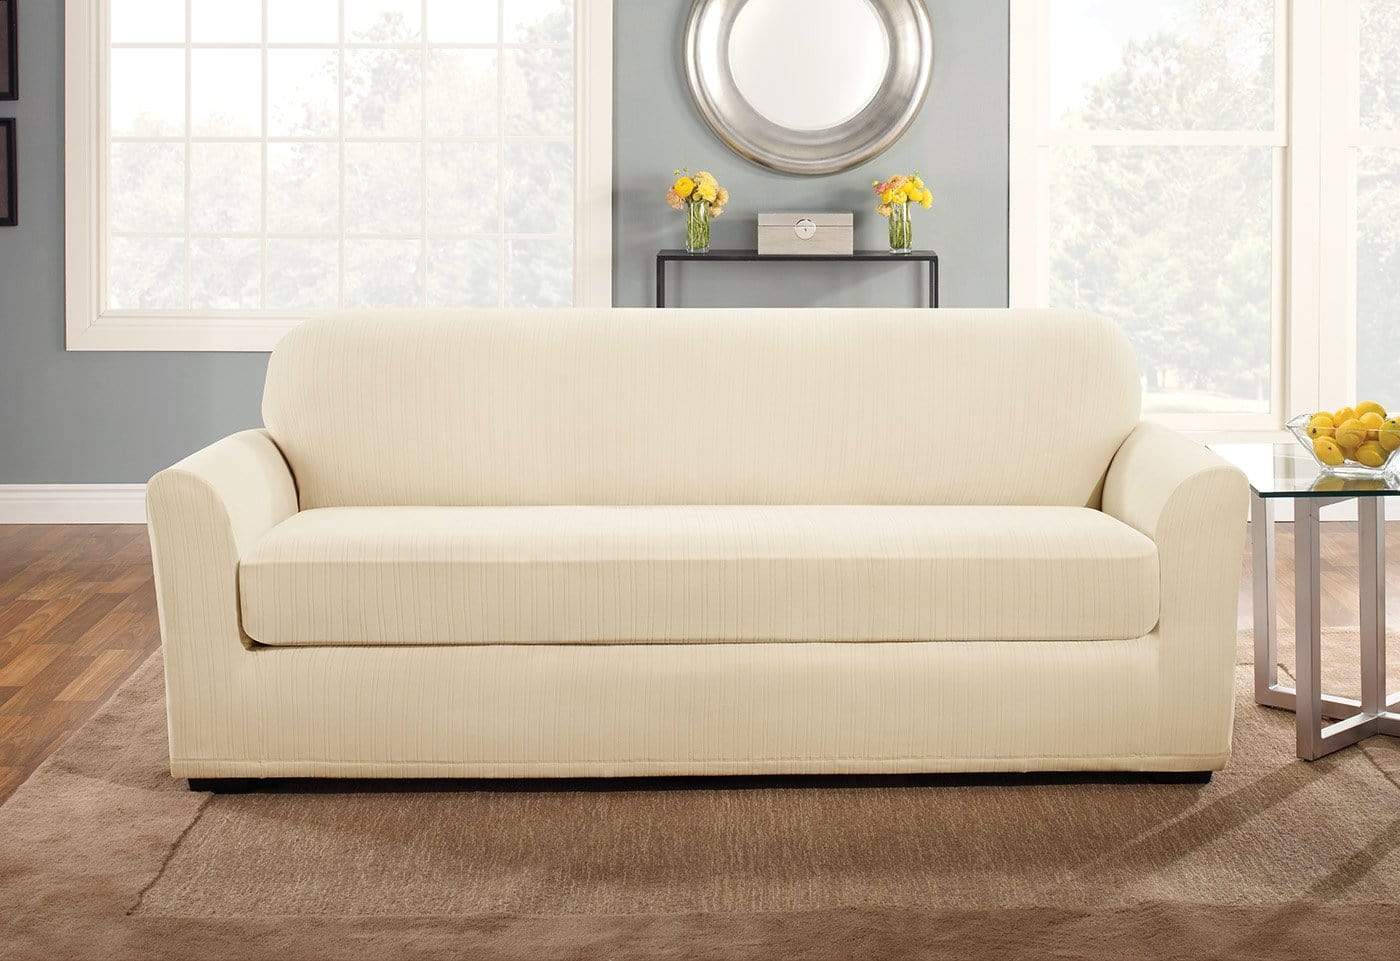 SureFit Stretch Pinstripe Two Piece Sofa Slipcover   Form Fit   Box Cushion   Machine Washable   Outlet in Cream